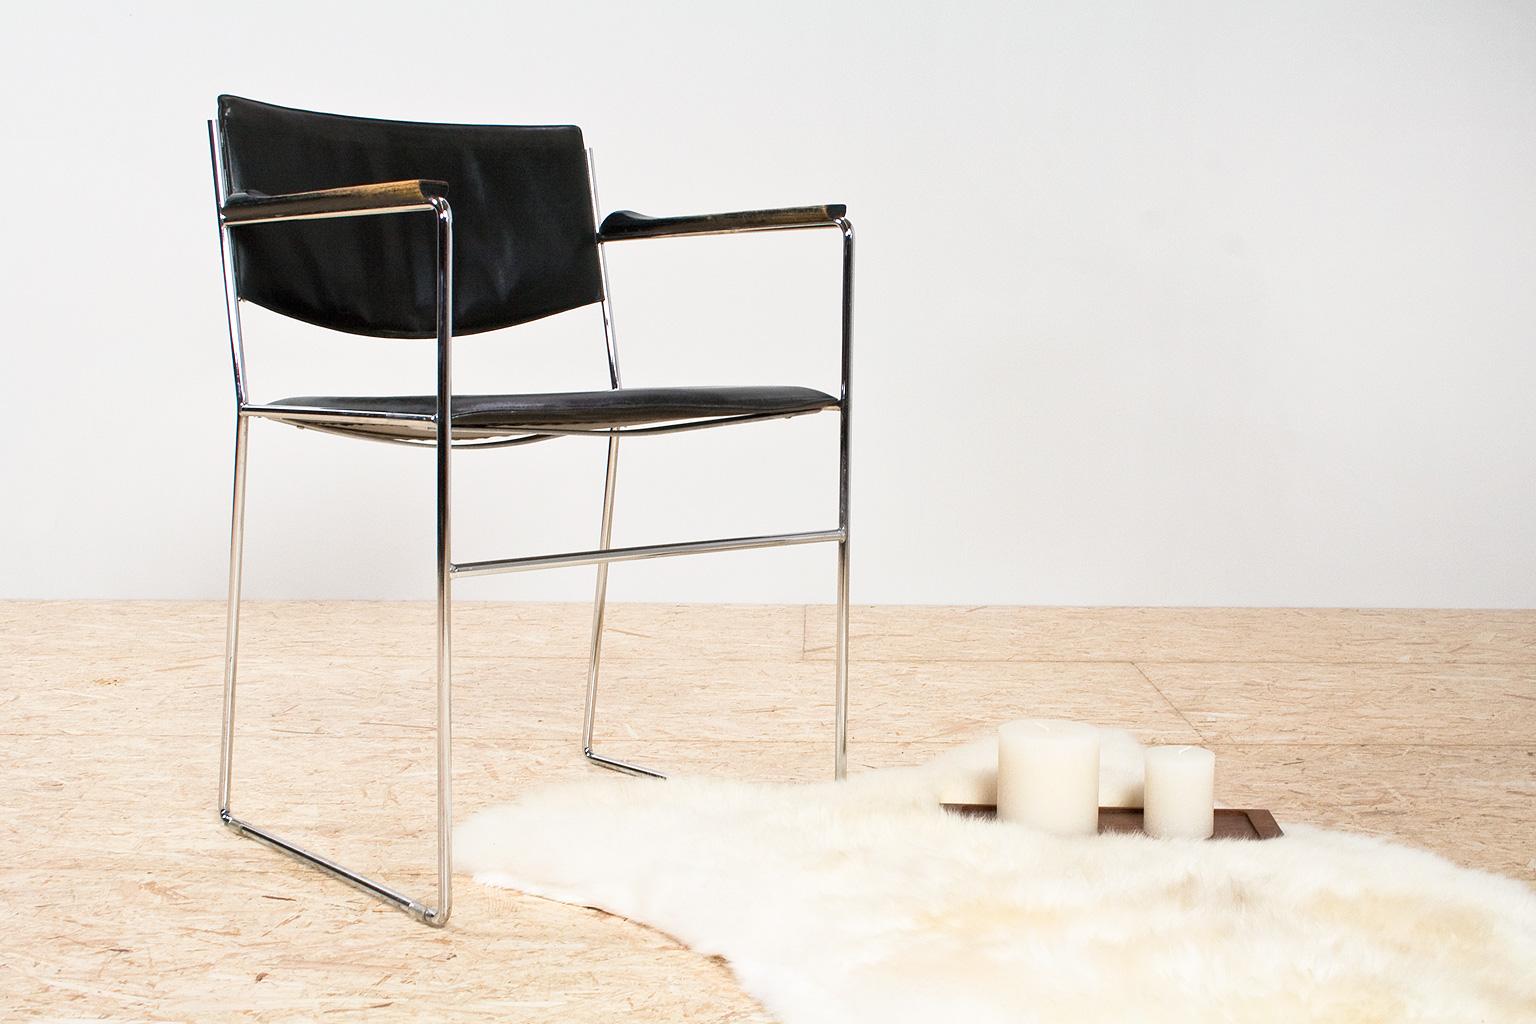 In style with the modernist designs of Marcel Breuer, Giovanni Carini, Mies Van Der Rohe, this is a beautiful and elegant chair. Elegant thin metal tubing is combined with luxury, thick leather seat and wooden armrest. The chair is in good vintage